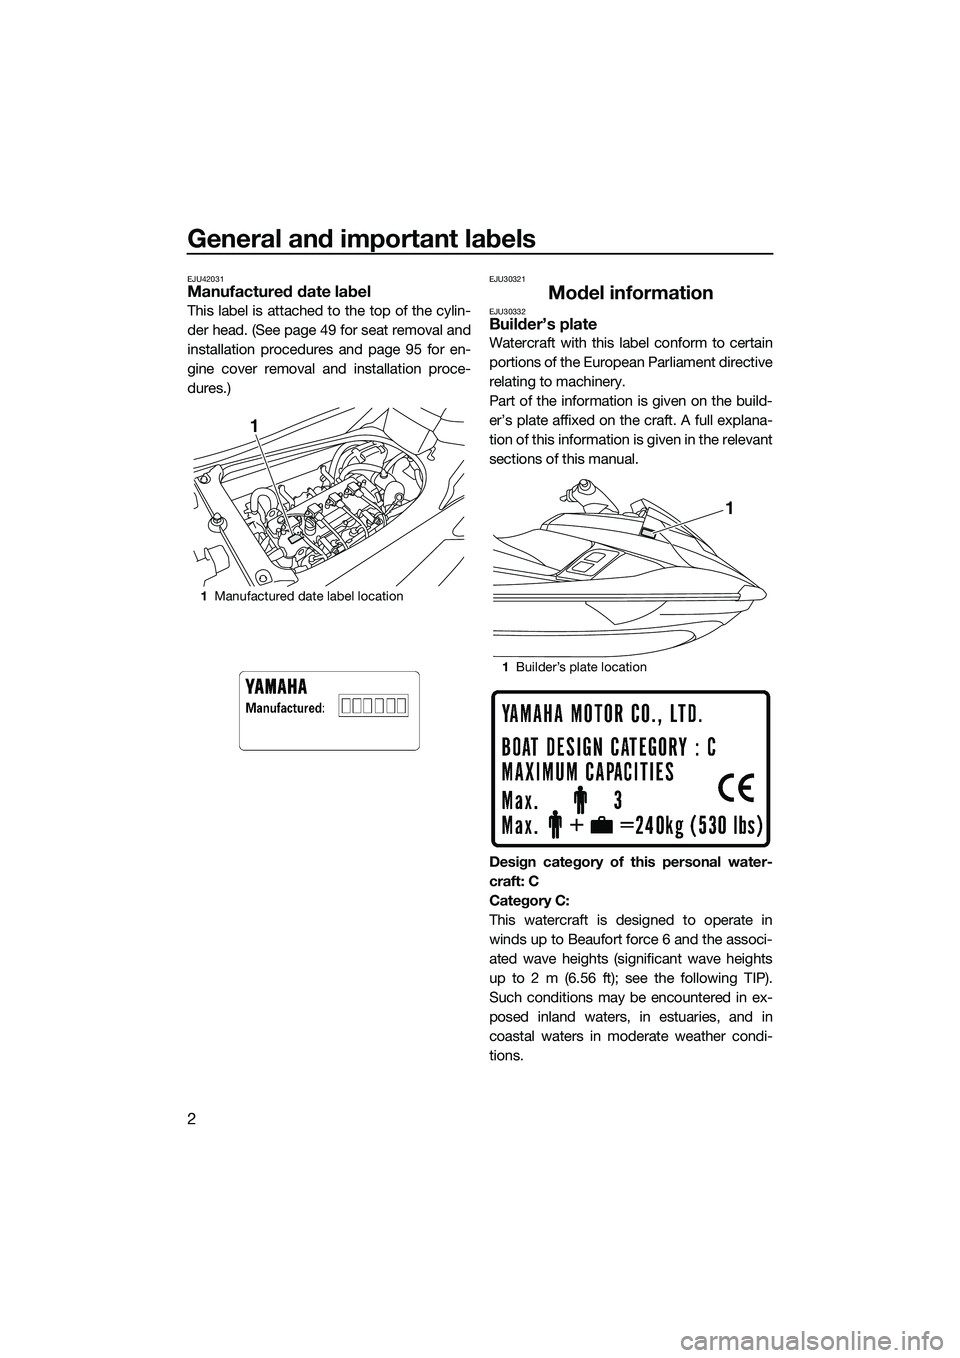 YAMAHA FX SVHO 2014  Owners Manual General and important labels
2
EJU42031Manufactured date label
This label is attached to the top of the cylin-
der head. (See page 49 for seat removal and
installation procedures and page 95 for en-
g